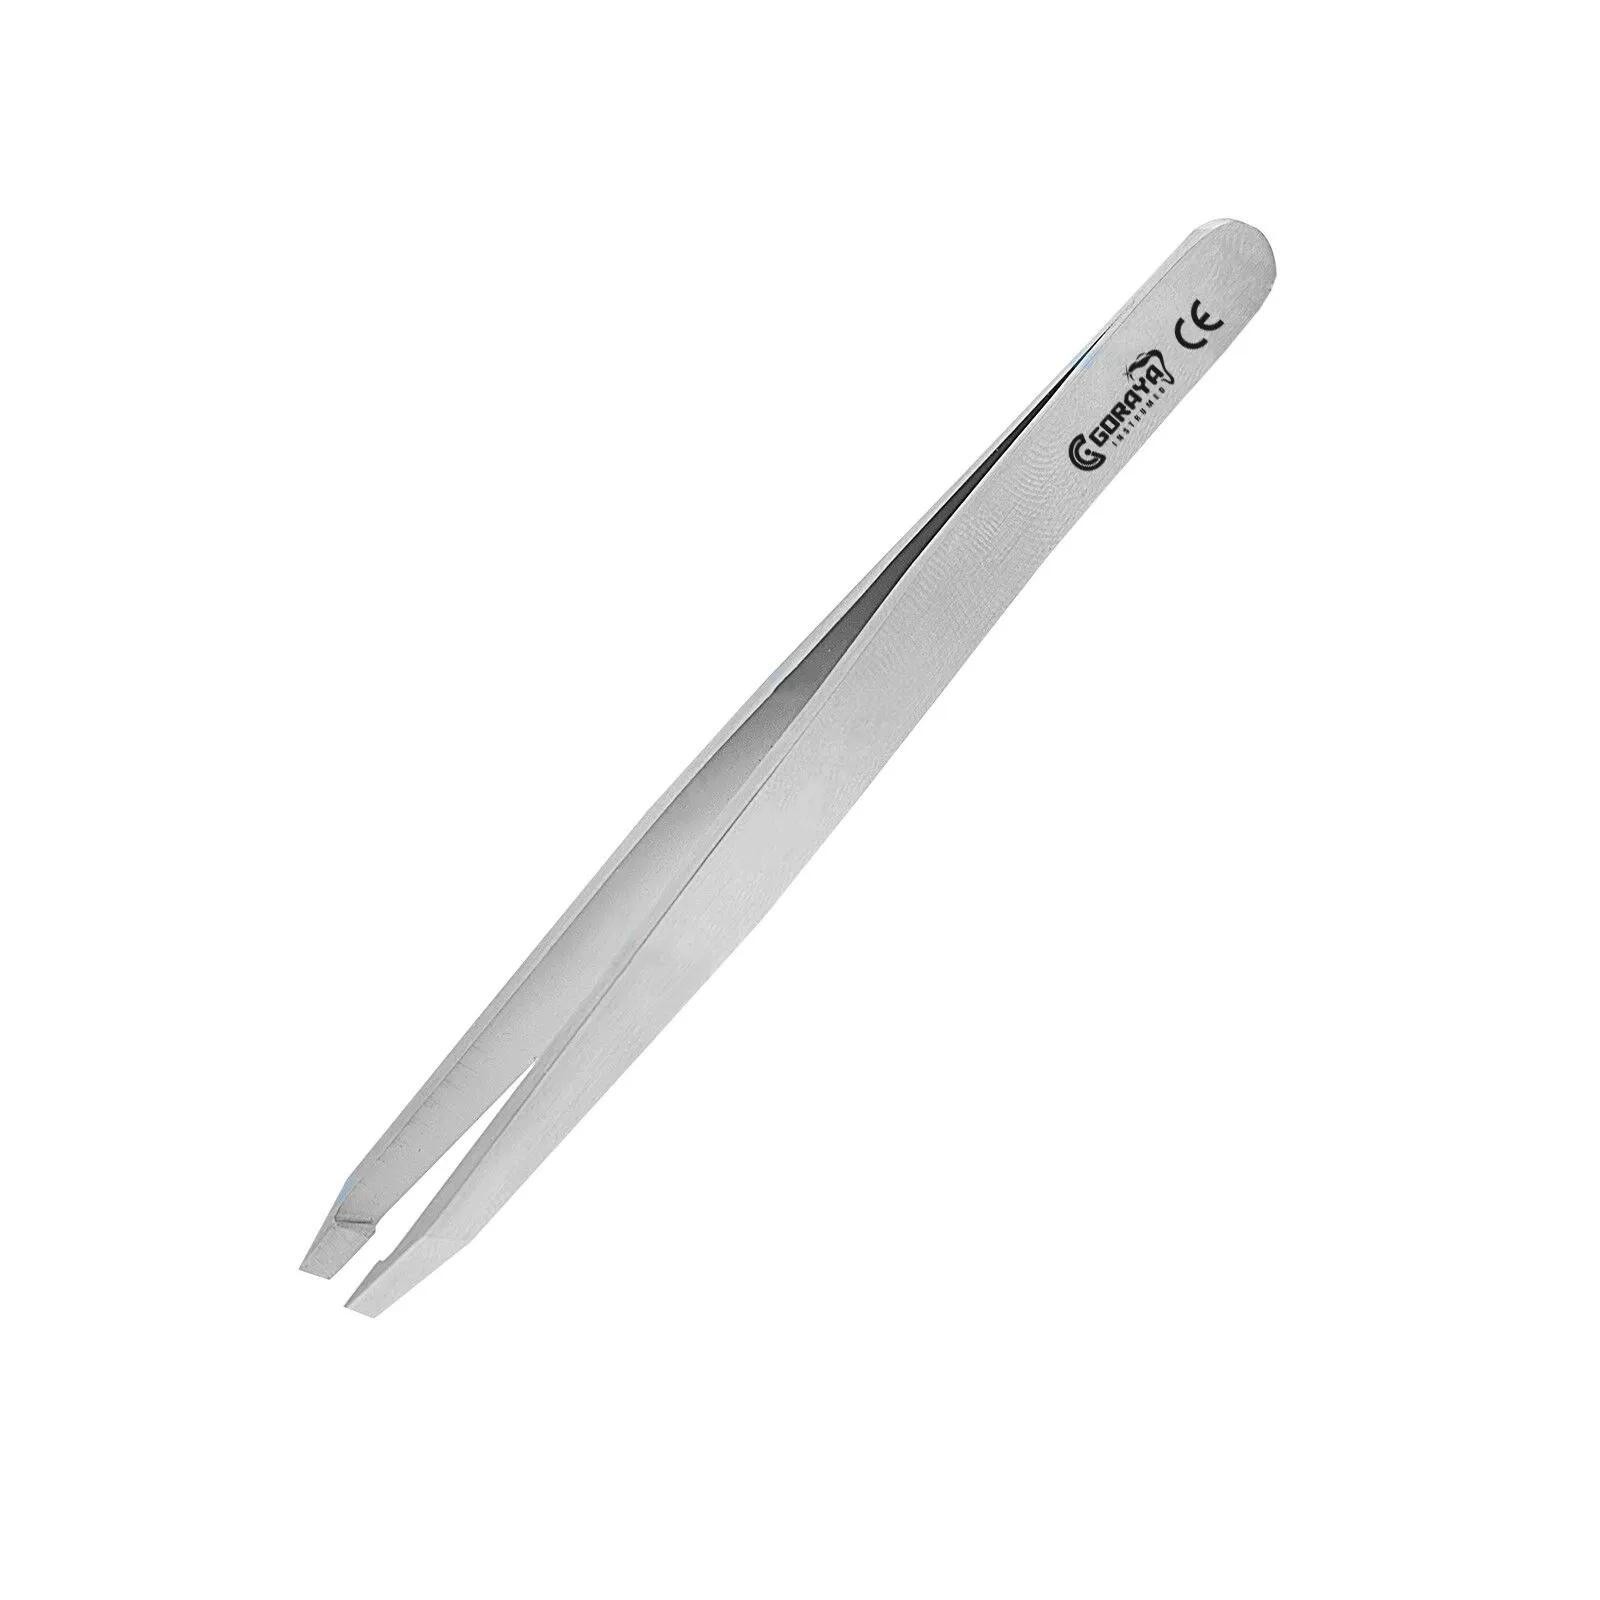 HOT SALE GORAYA GERMAN Pro Eyebrow Tweezers Professional Slanted Tip Hair Removal Beauty Salon New CE ISO APPROVED